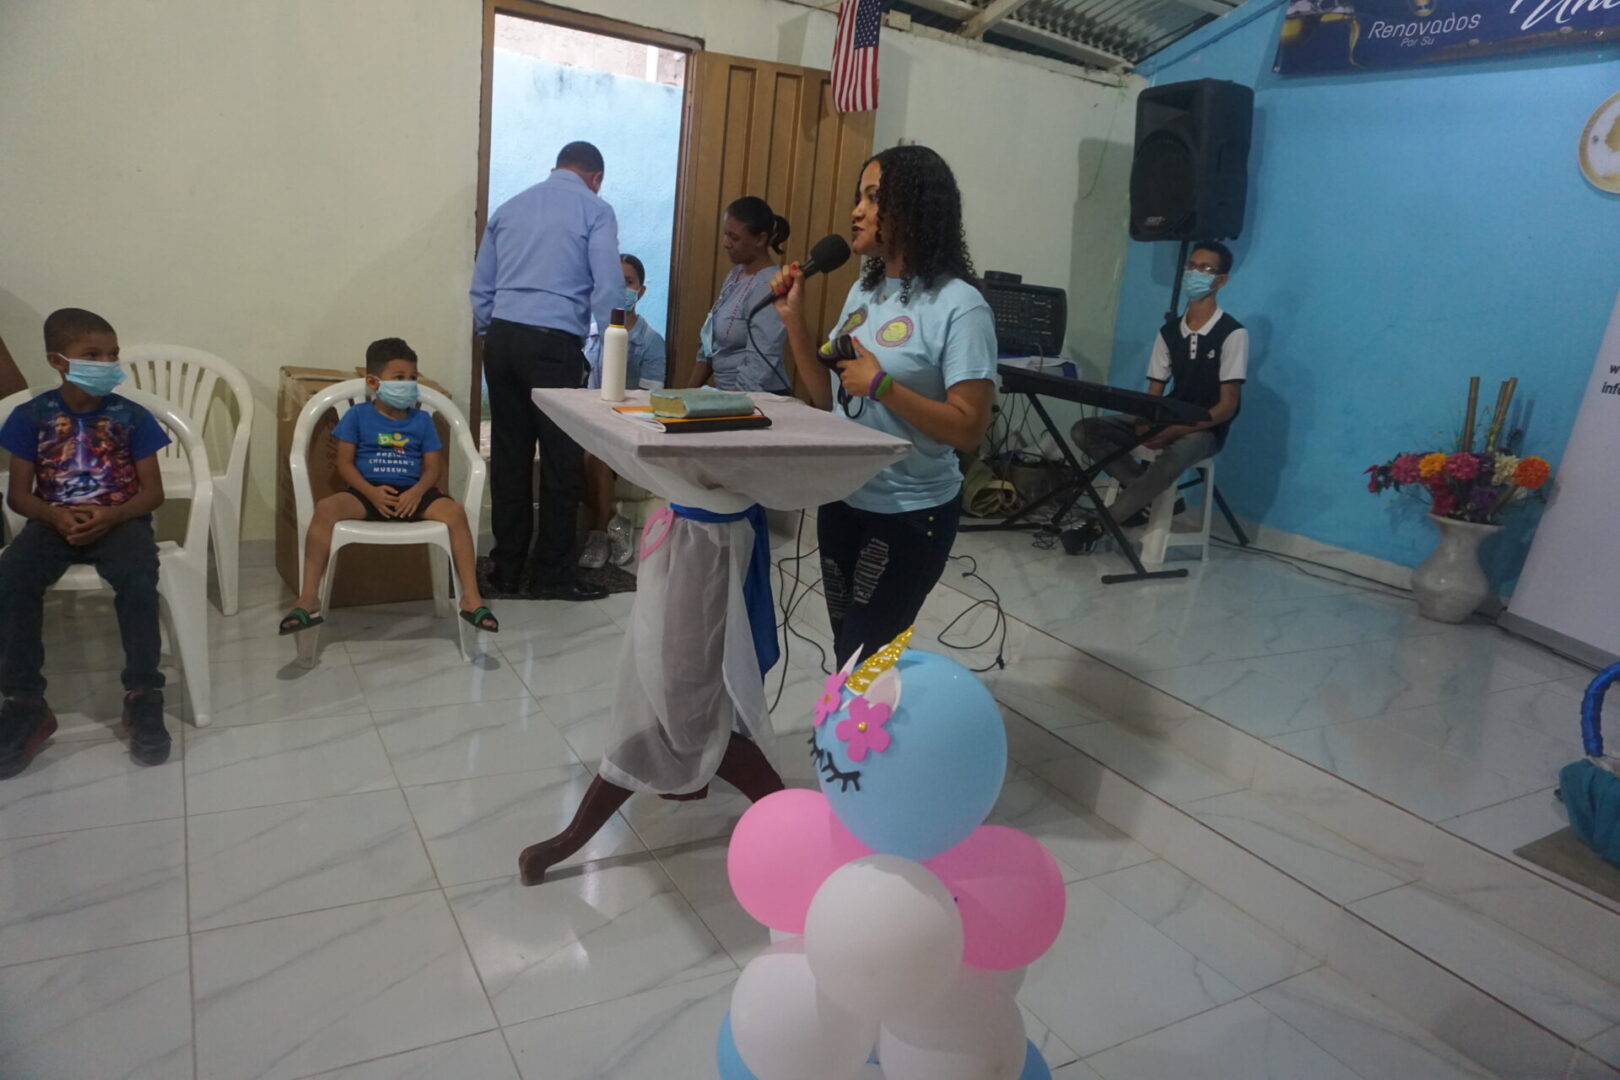 One of our female staff talking in front of the children in the church; other adults talking near the door in front